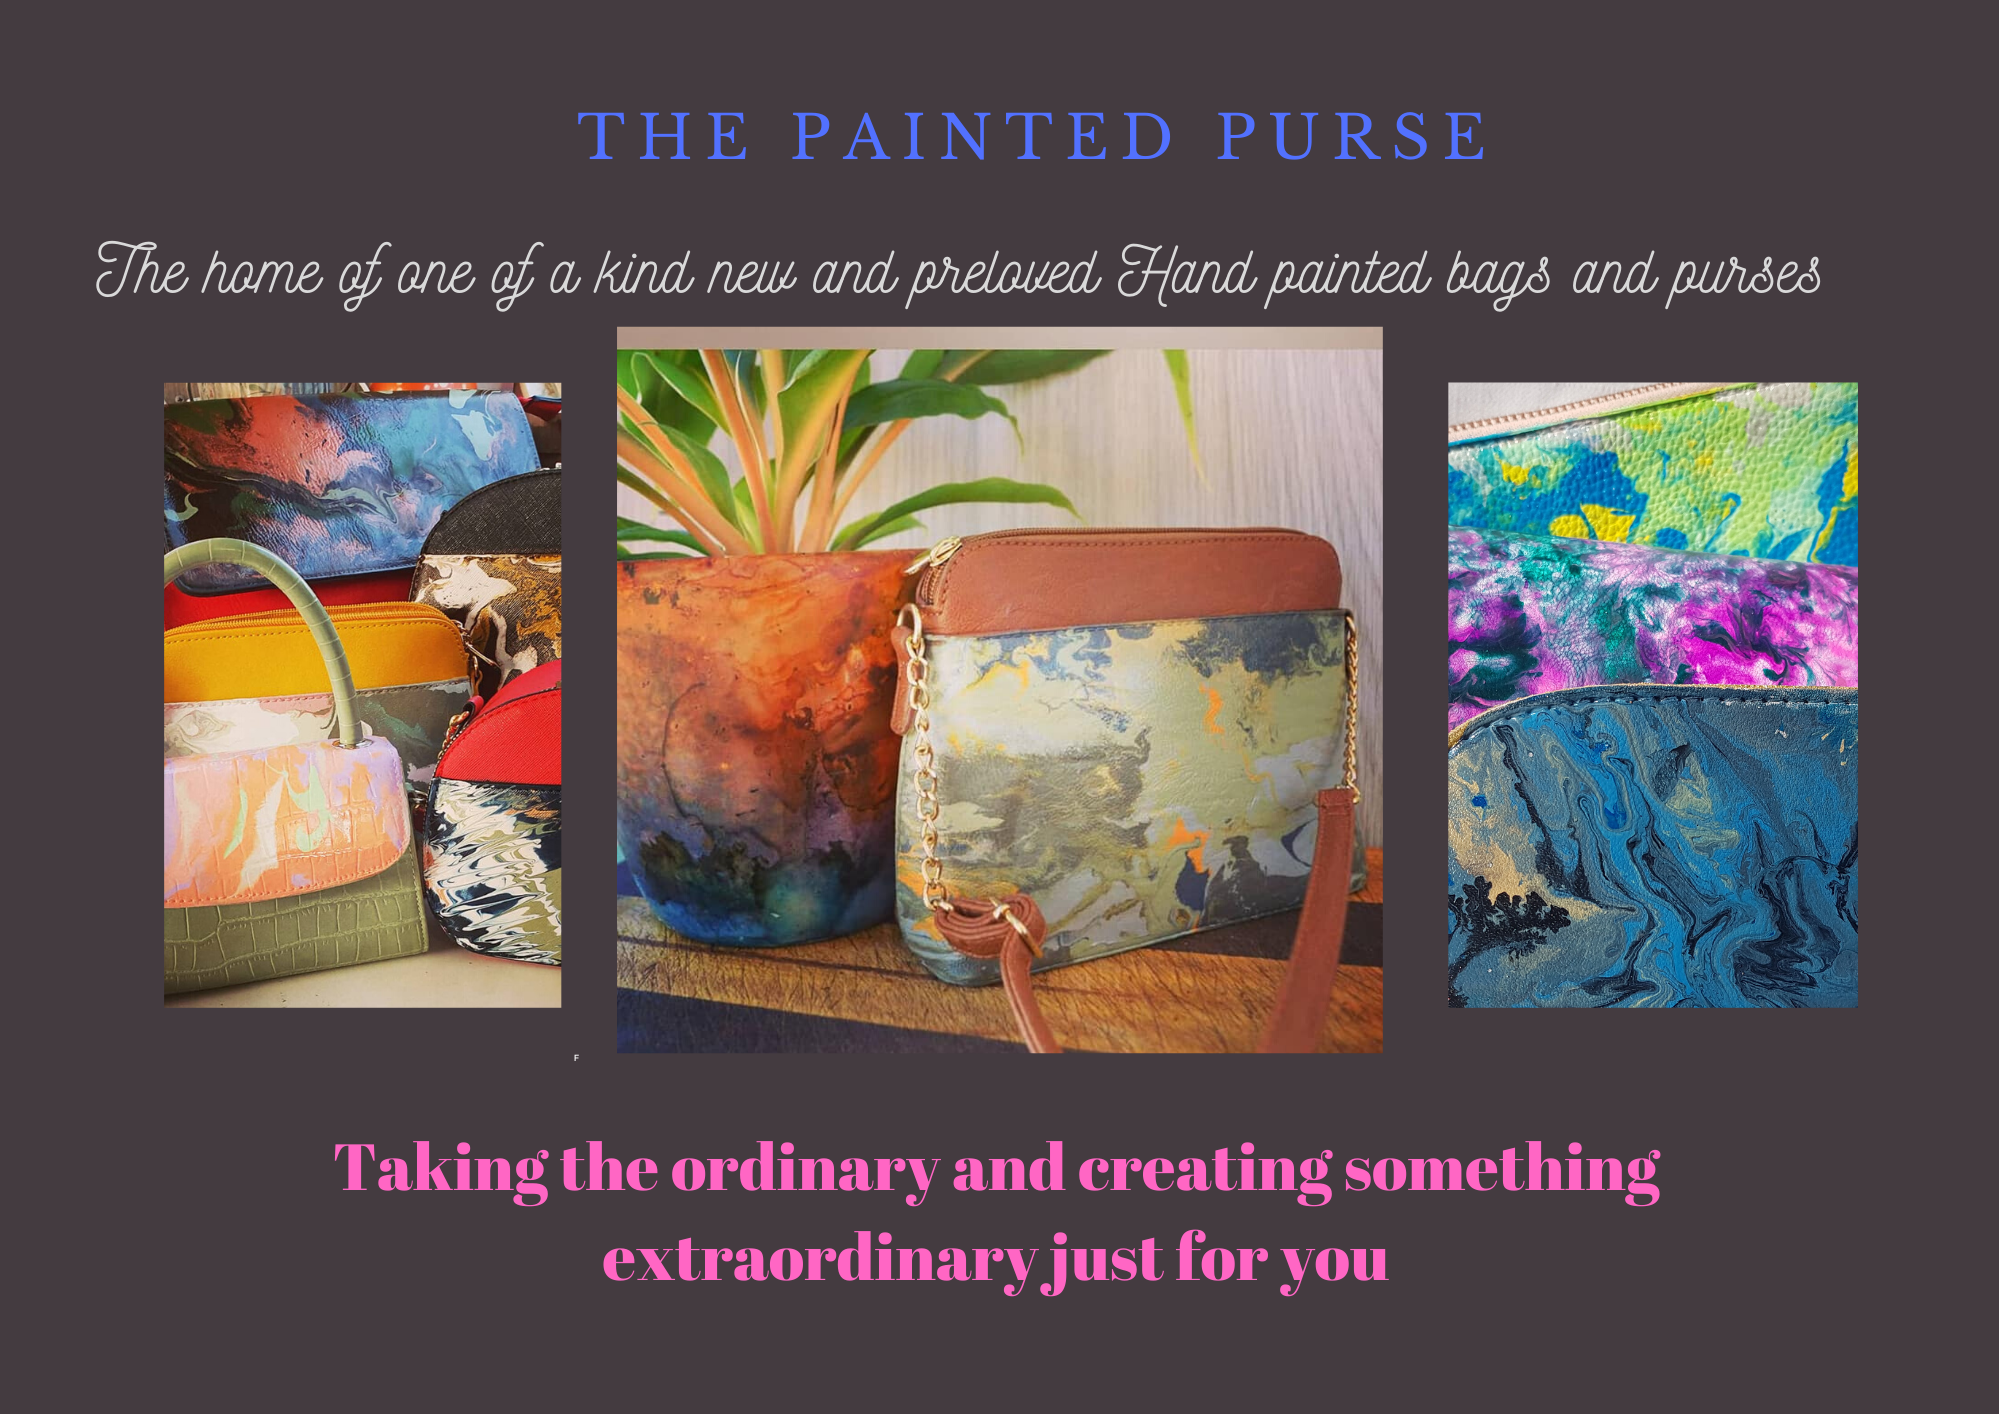 The preloved painted purse